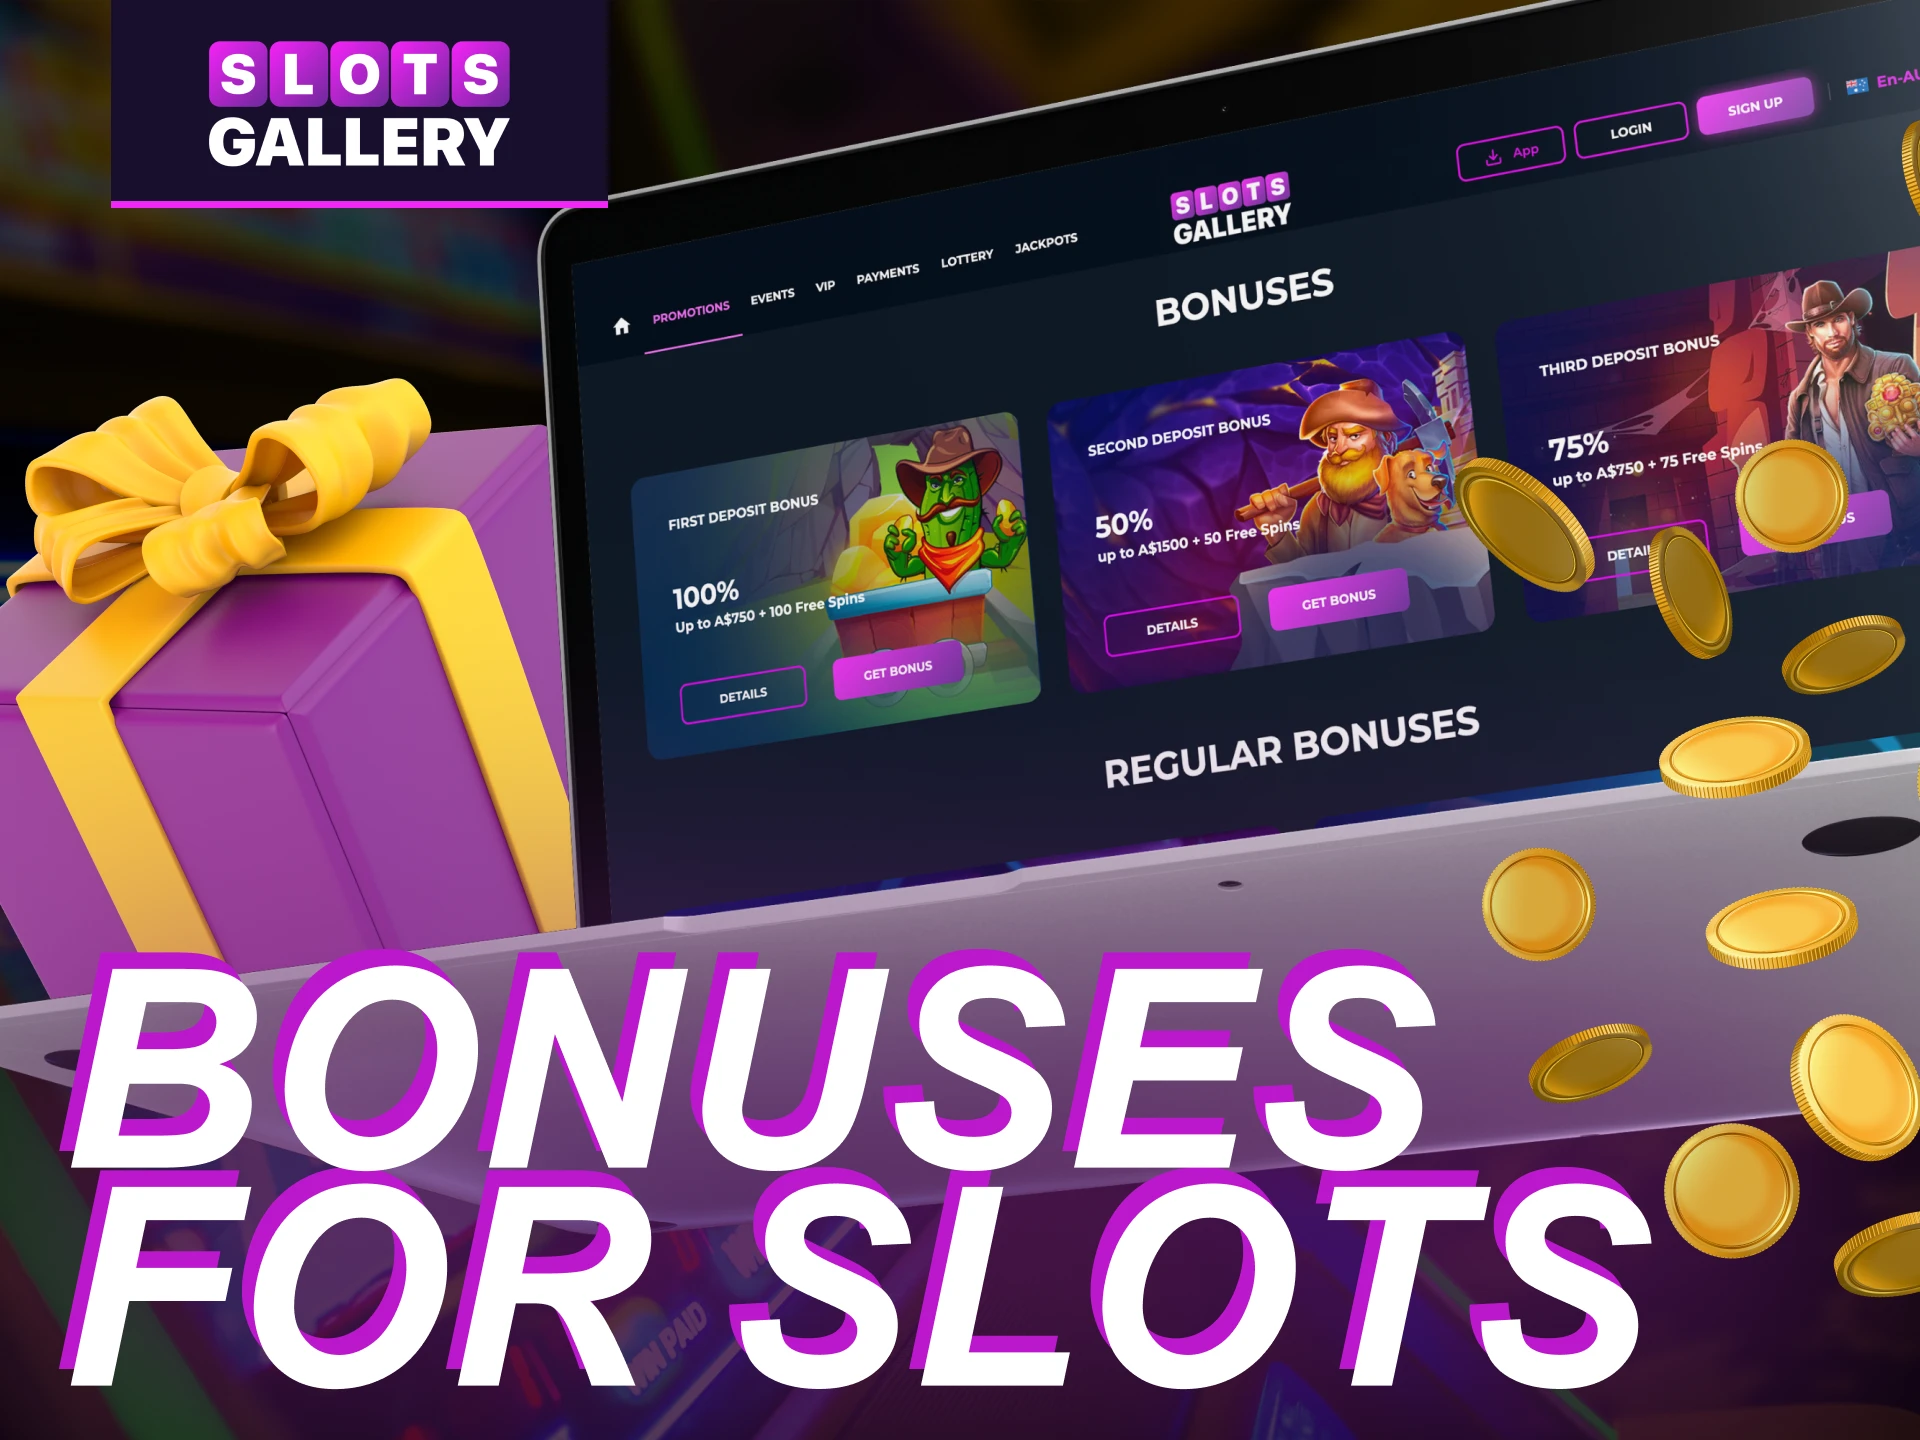 What bonuses can I get when playing slot games at the Slots Gallery online casino.